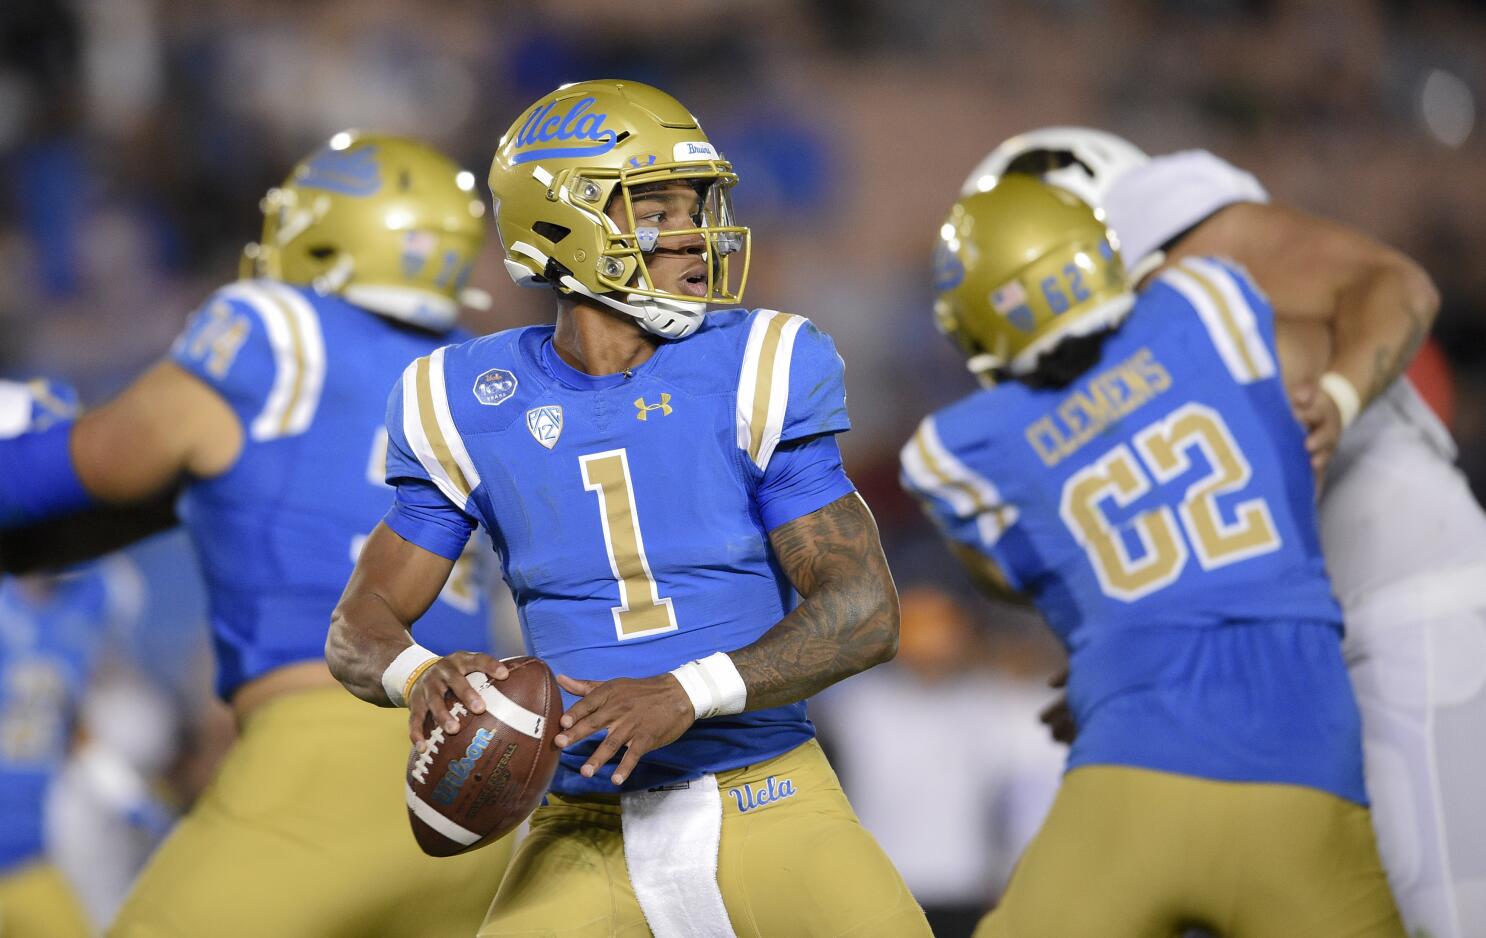 UCLA v. Under Armour: Invoking the Force Majeure Clause - Cardozo AELJ